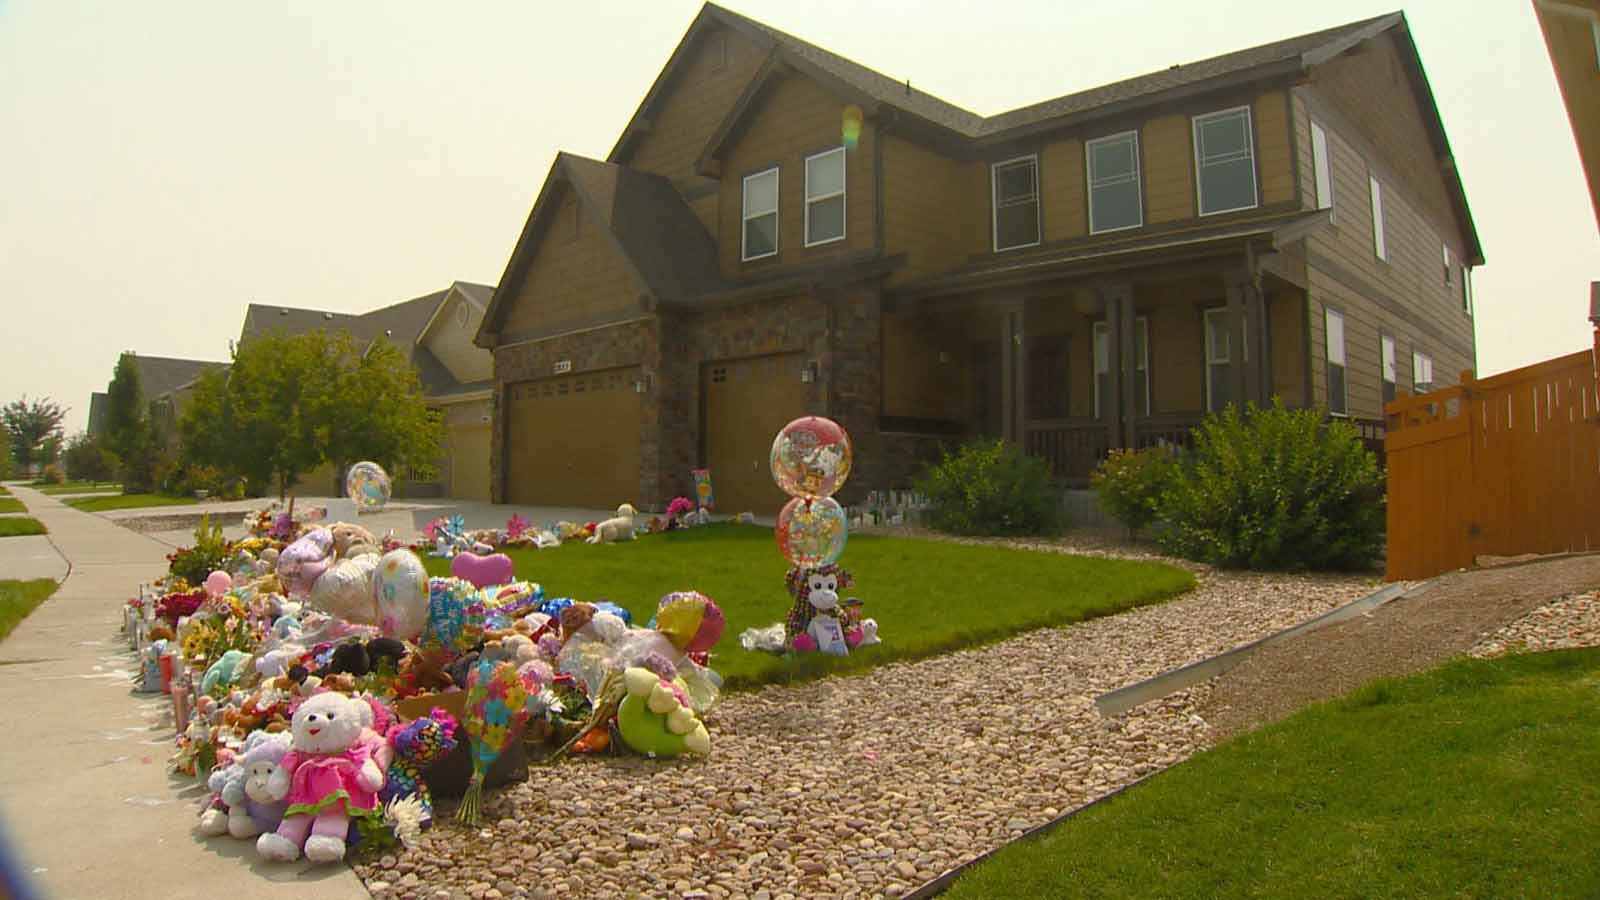 The bankruptcy attorney trying to sell the house Chris Watts committed his murders in has finally given up. Read more into why Chris Watts's home is empty.